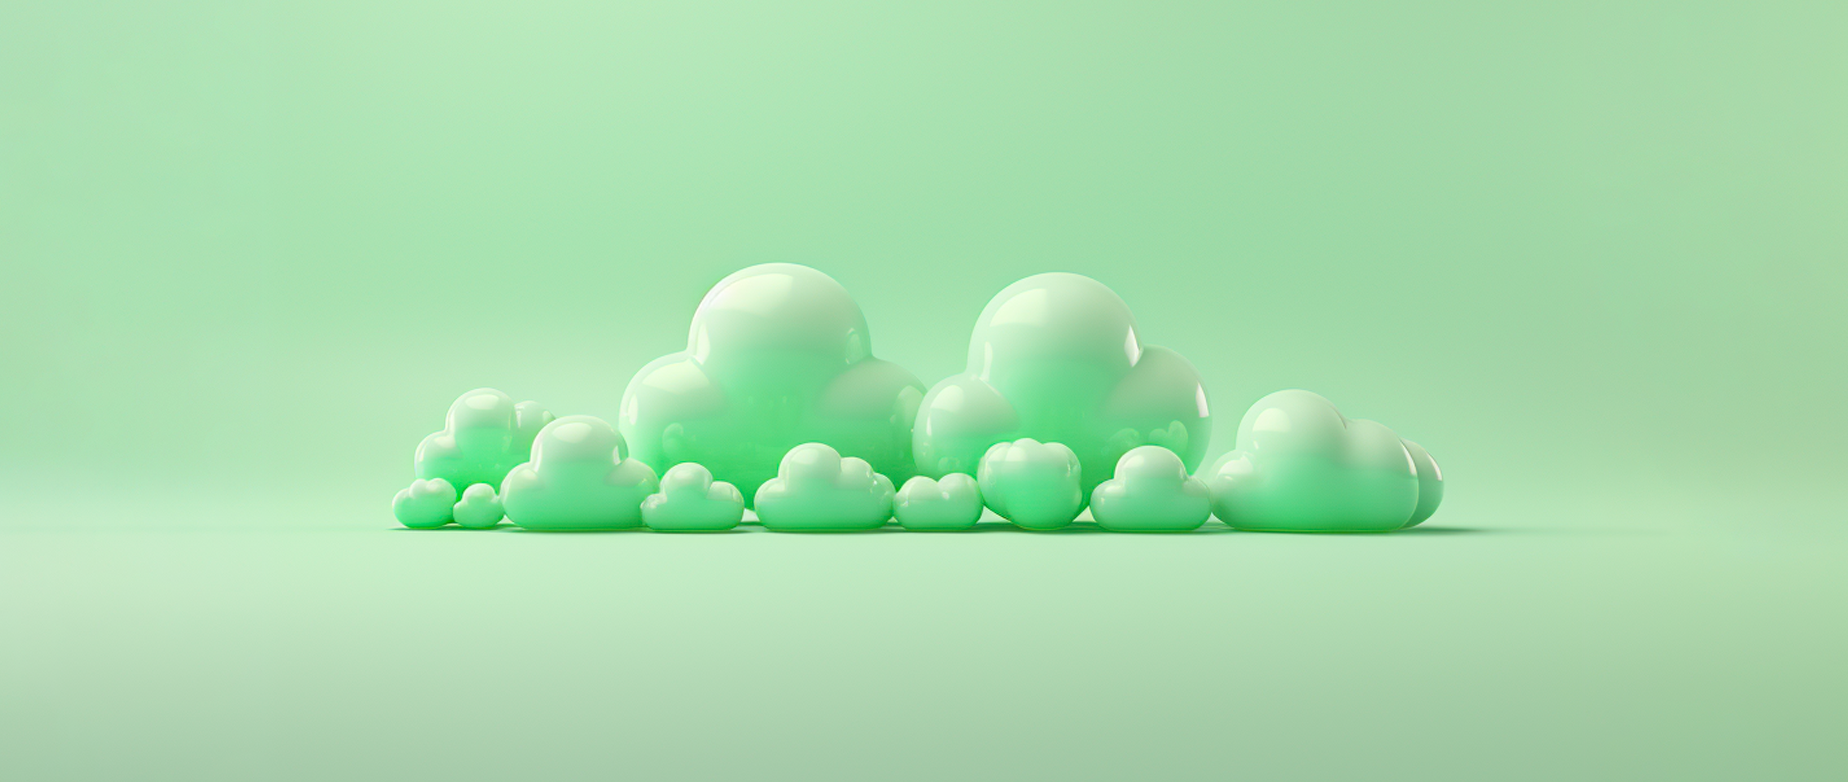 Shiny green clouds on a mint green background.